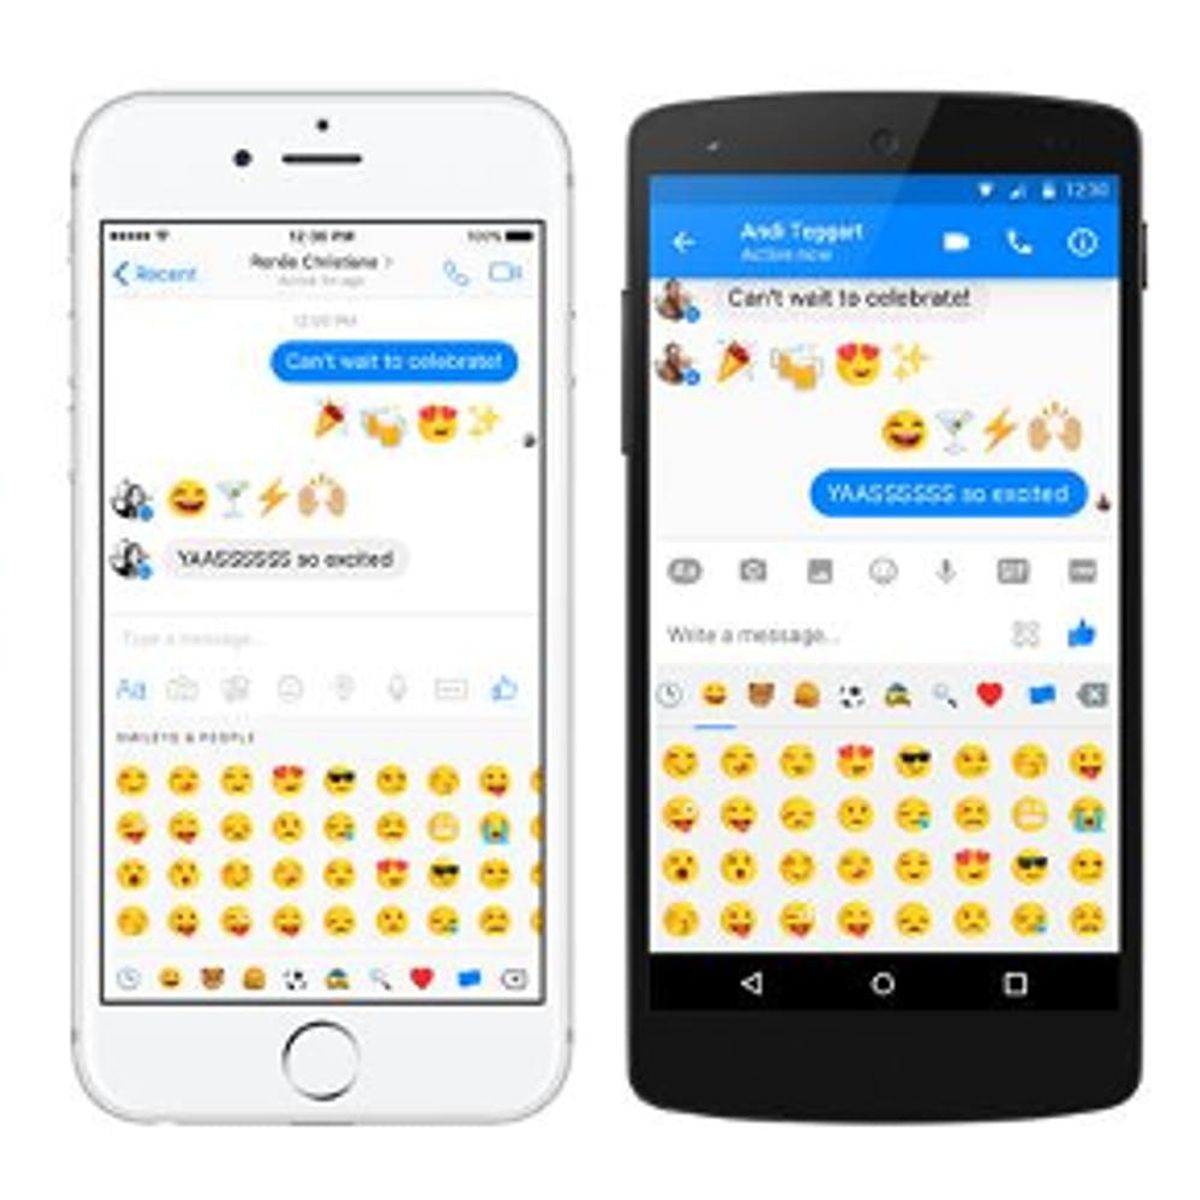 Facebook Is Making Some Awesome Changes to Their Emoji